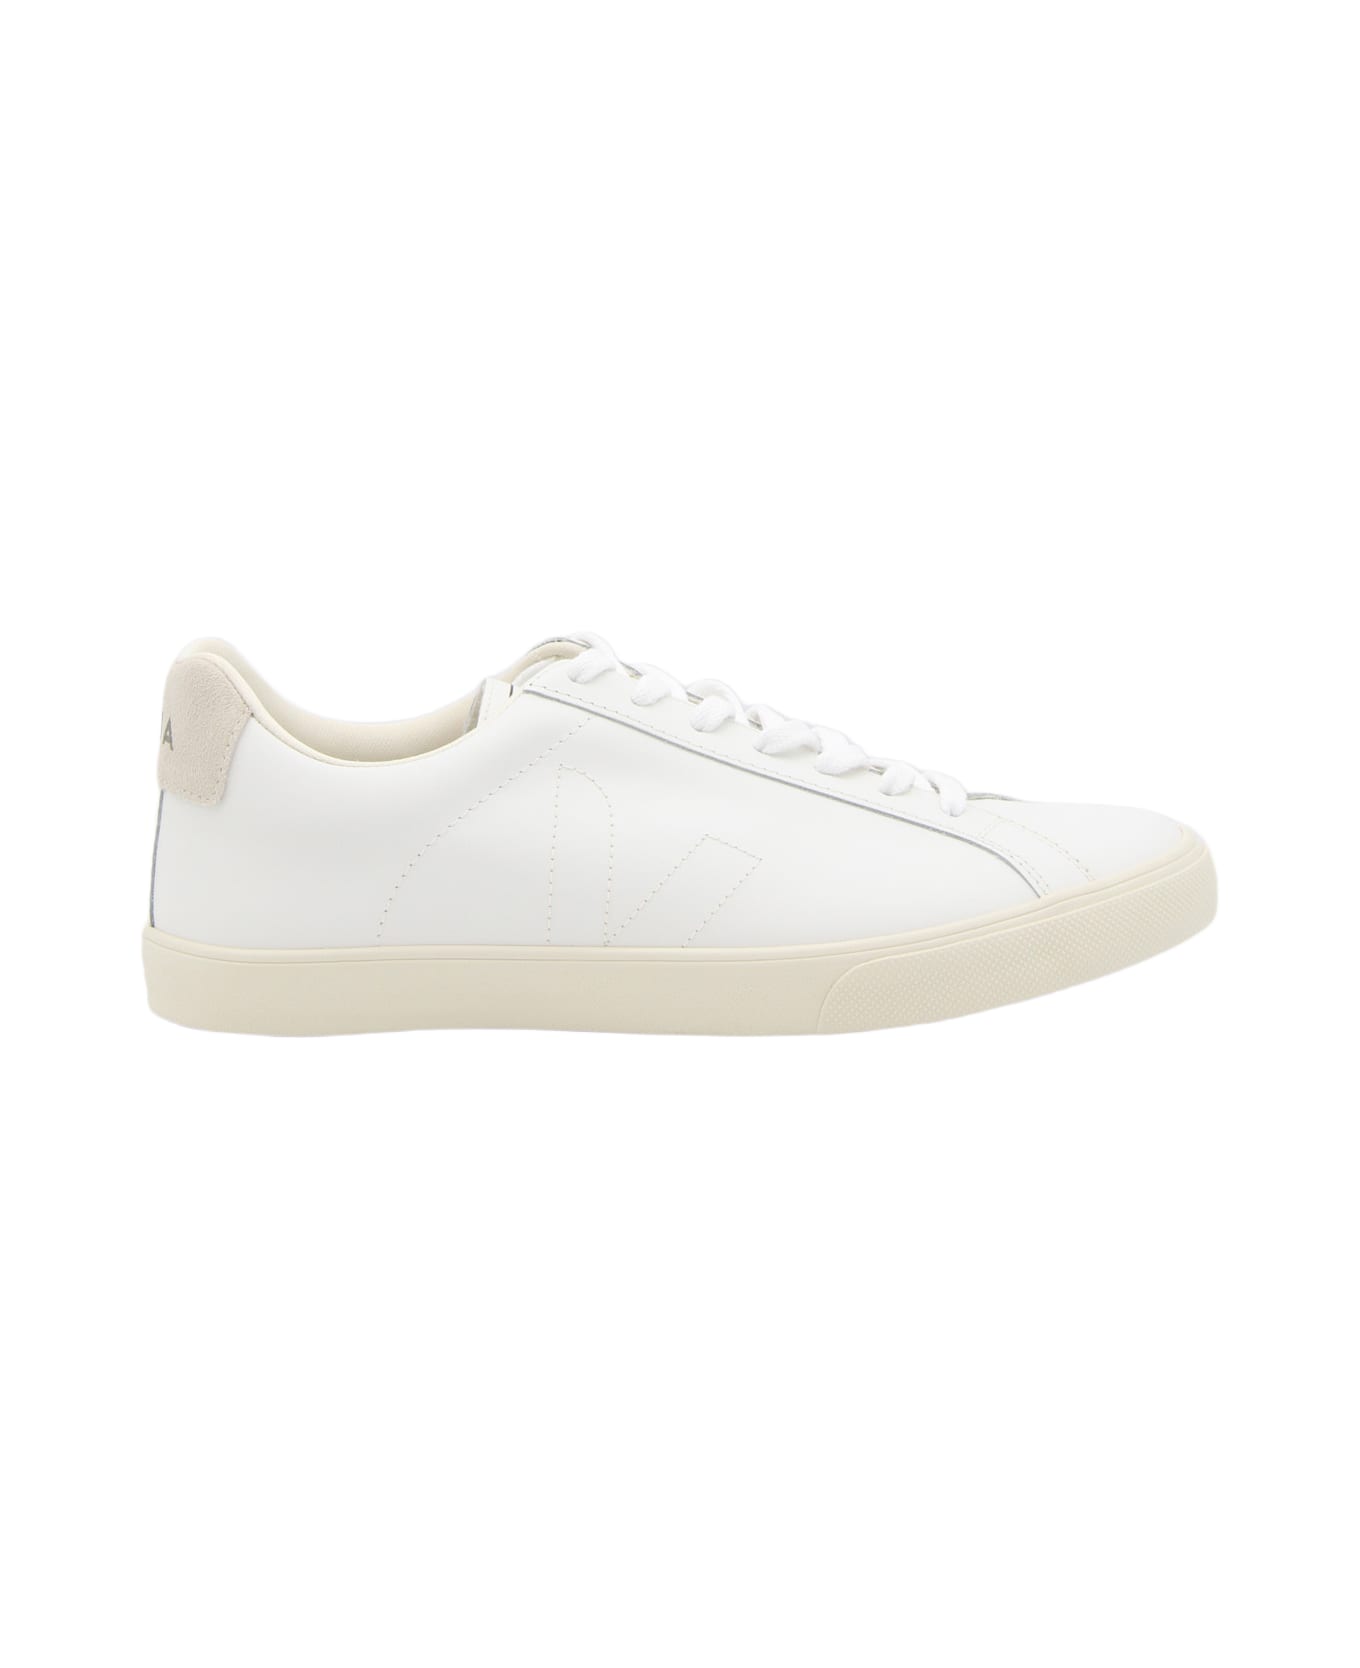 Veja White And Beige Faux Leather Esplar Sneakers - EXTRA-WHITE スニーカー